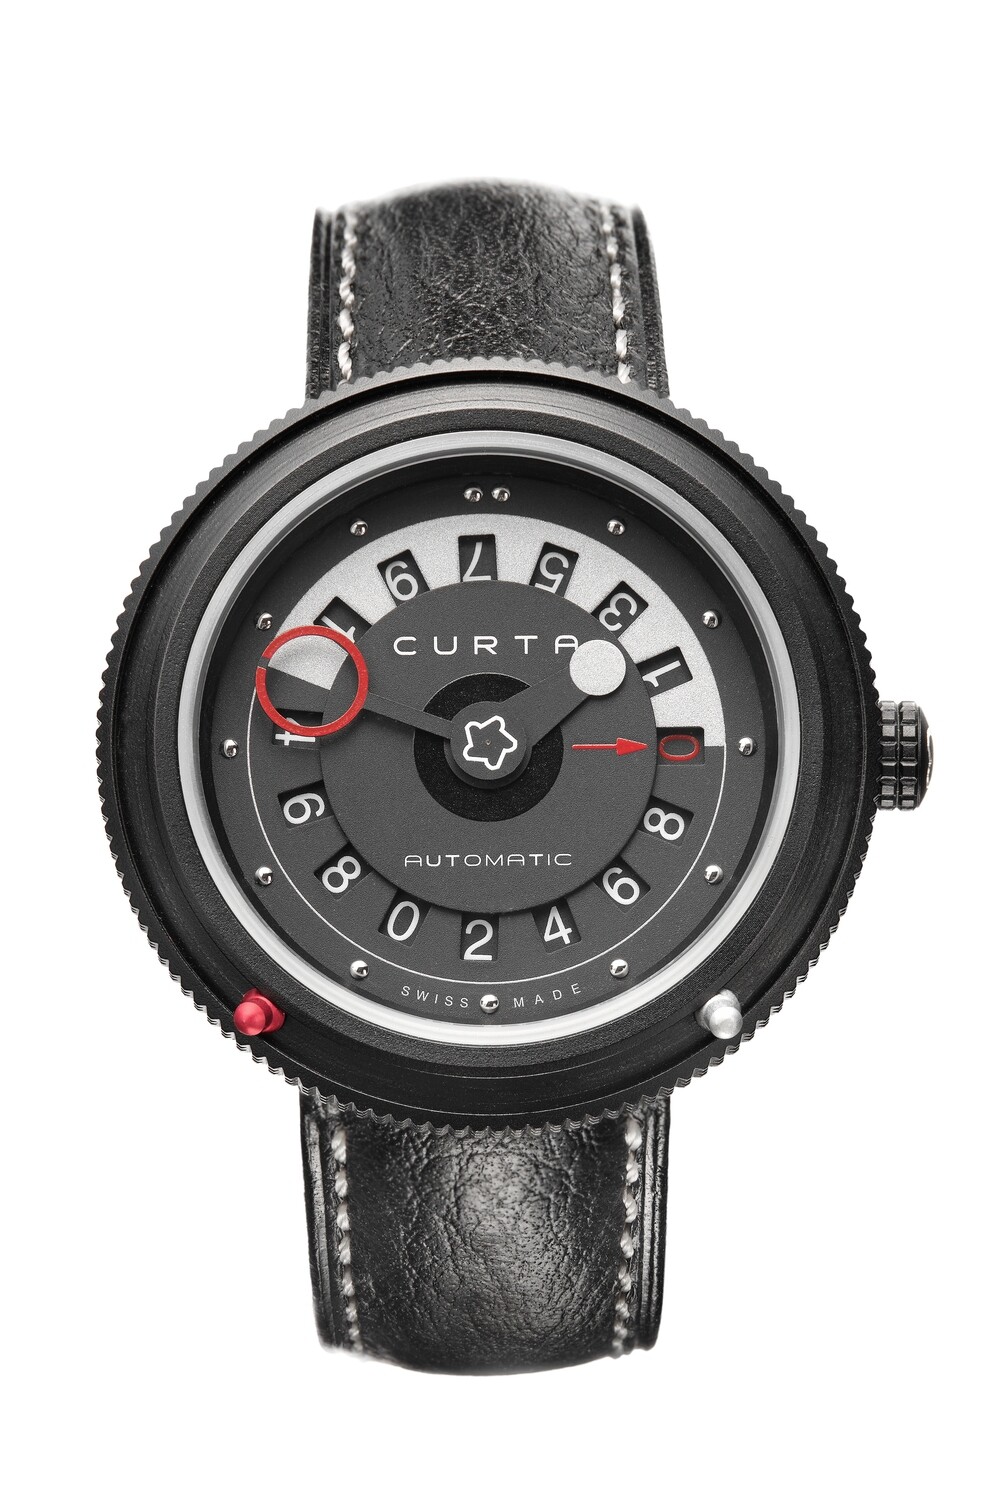 CURTA watch - Swiss made - limited edition